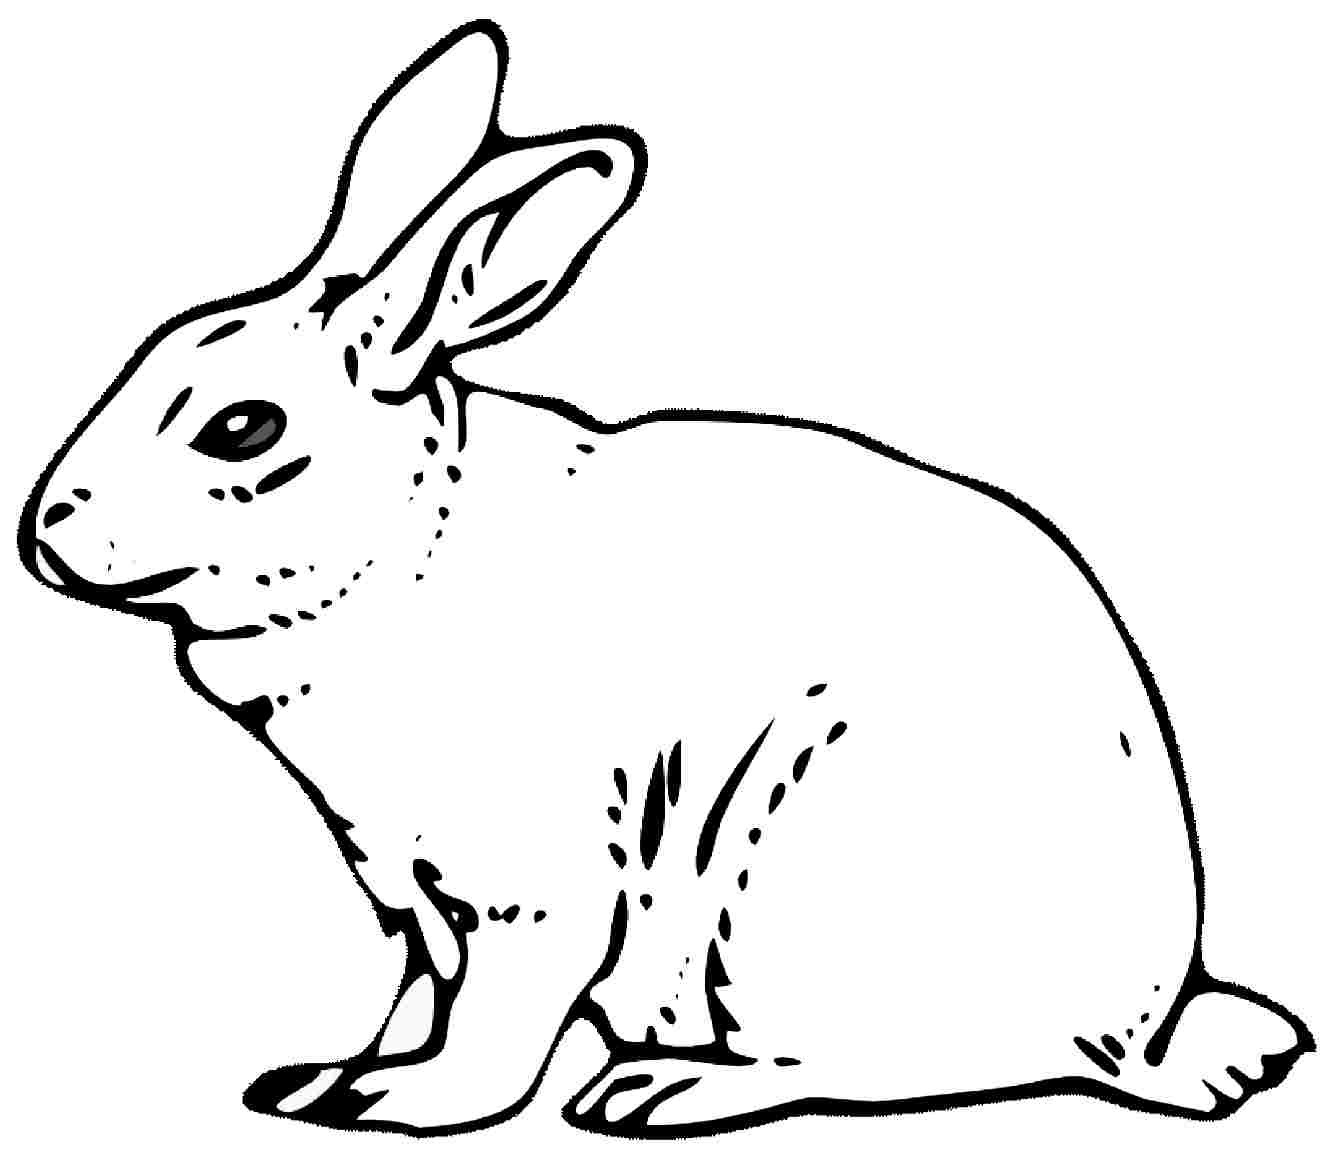 Free Rabbit Coloring Pages Images Of Printable Rabbit Coloring Pages Asteknikyapi